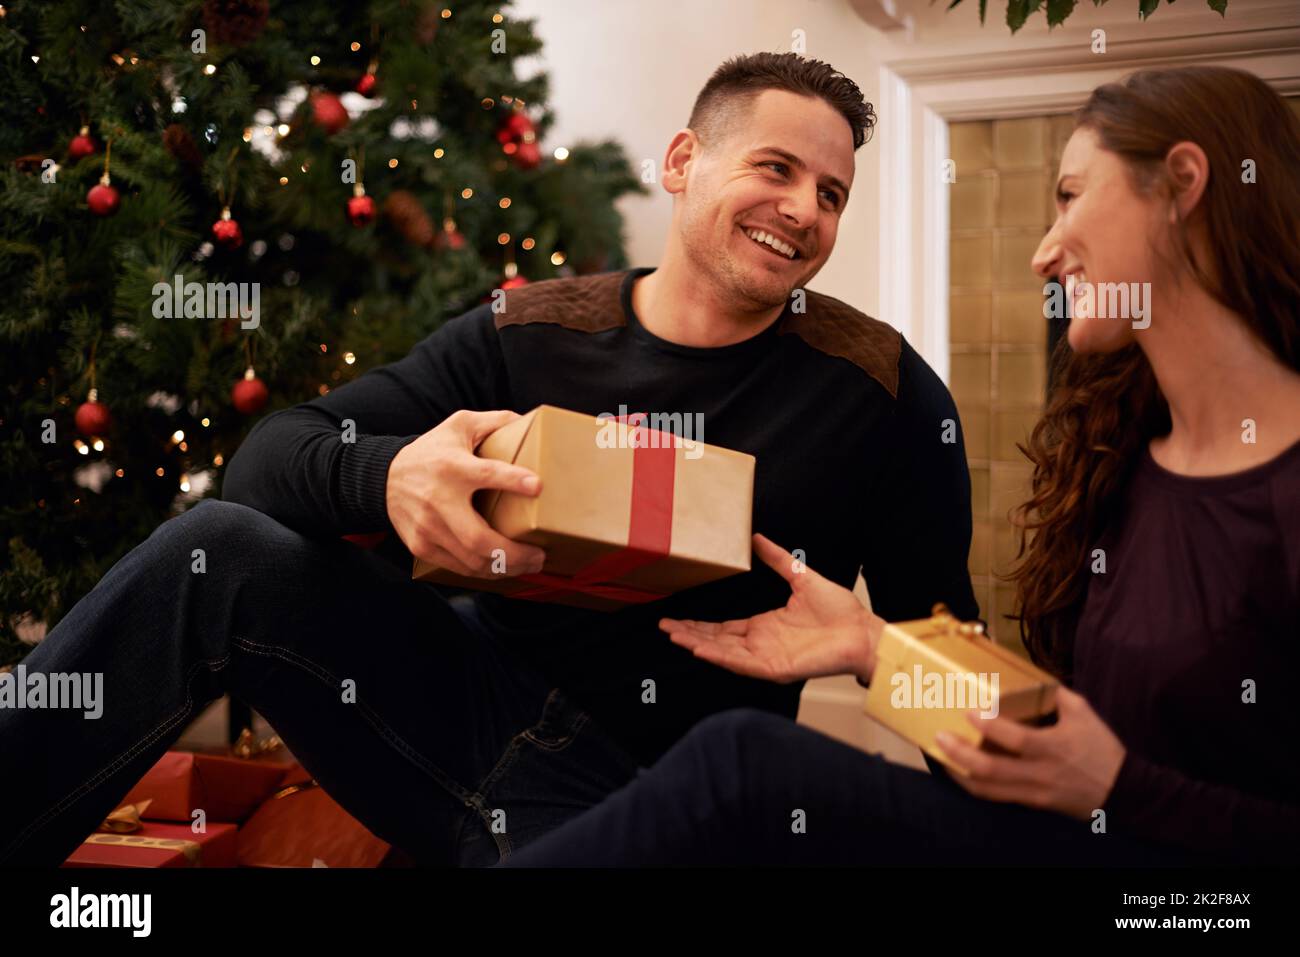 The best gift around the tree is love. A happy young couple opening presents on Christmas day. Stock Photo